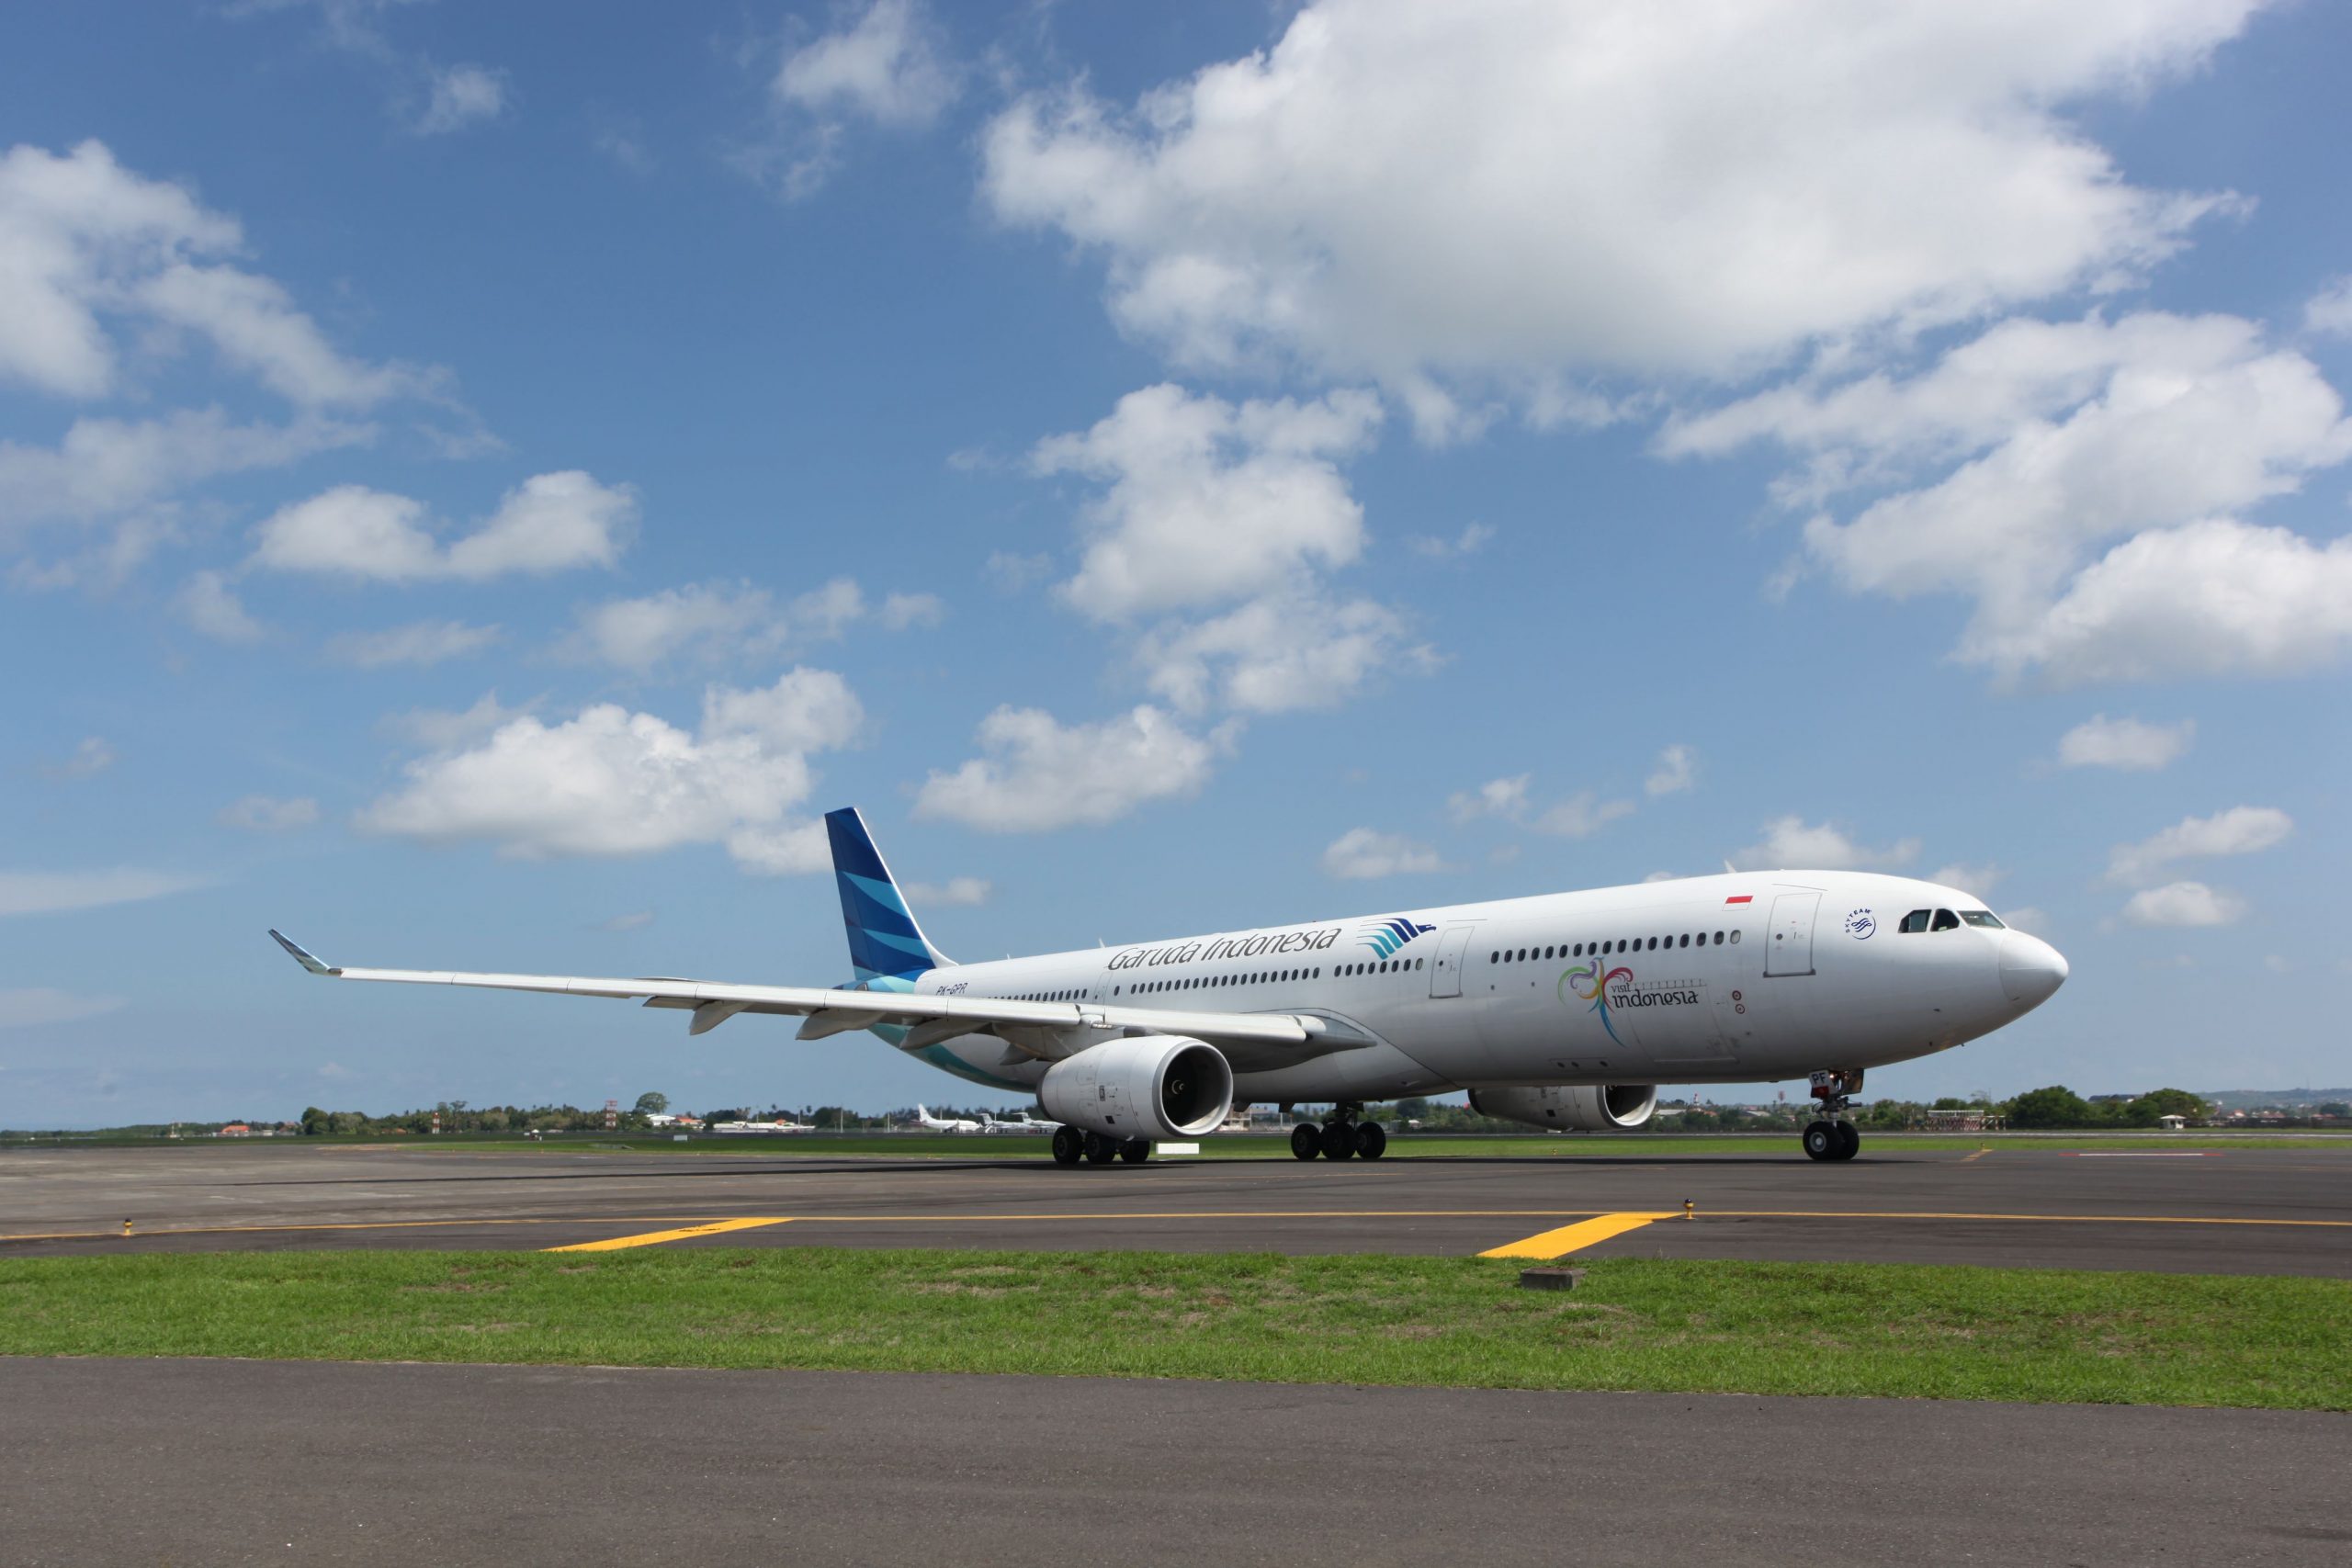 Garuda Indonesia is using A330-300s between Jakarta and Melbourne